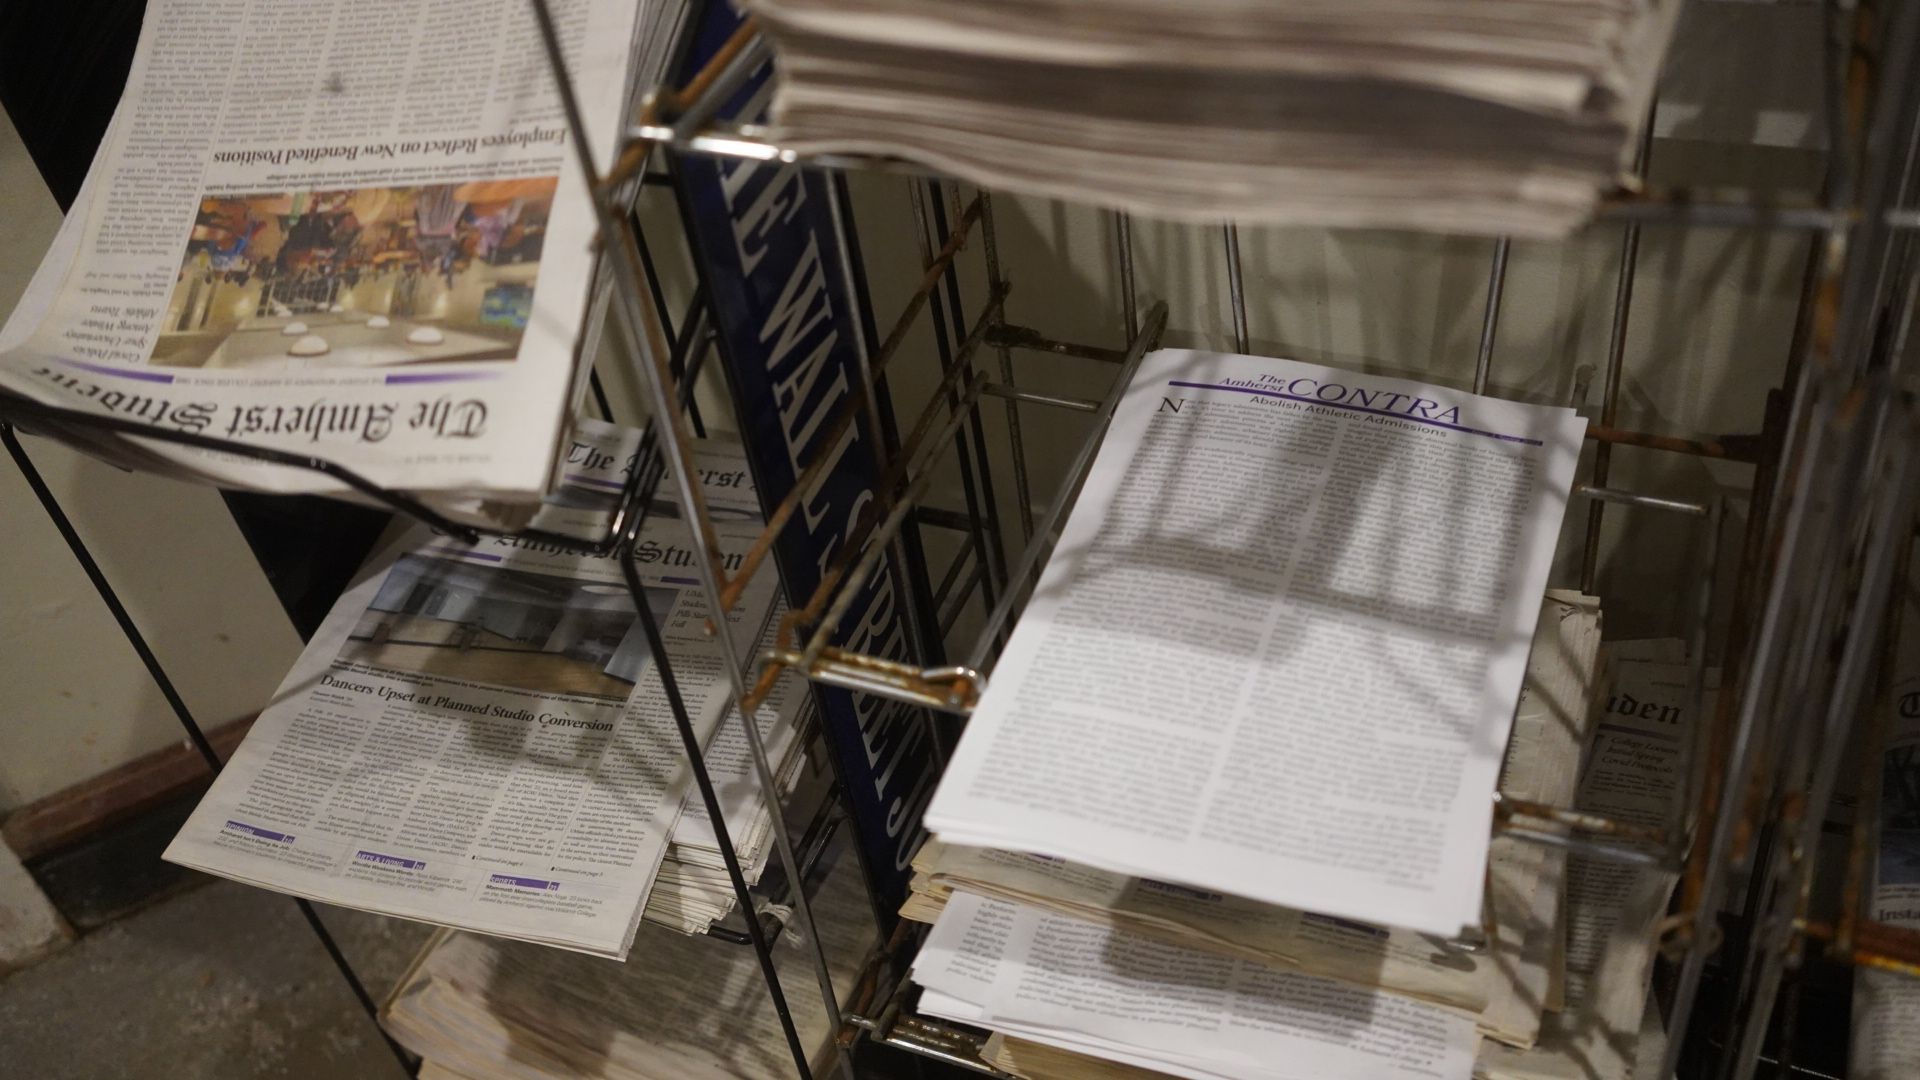 The image depicts a stack of several copies of The Contra sitting on a newspaper rack in Valentine Dining Hall